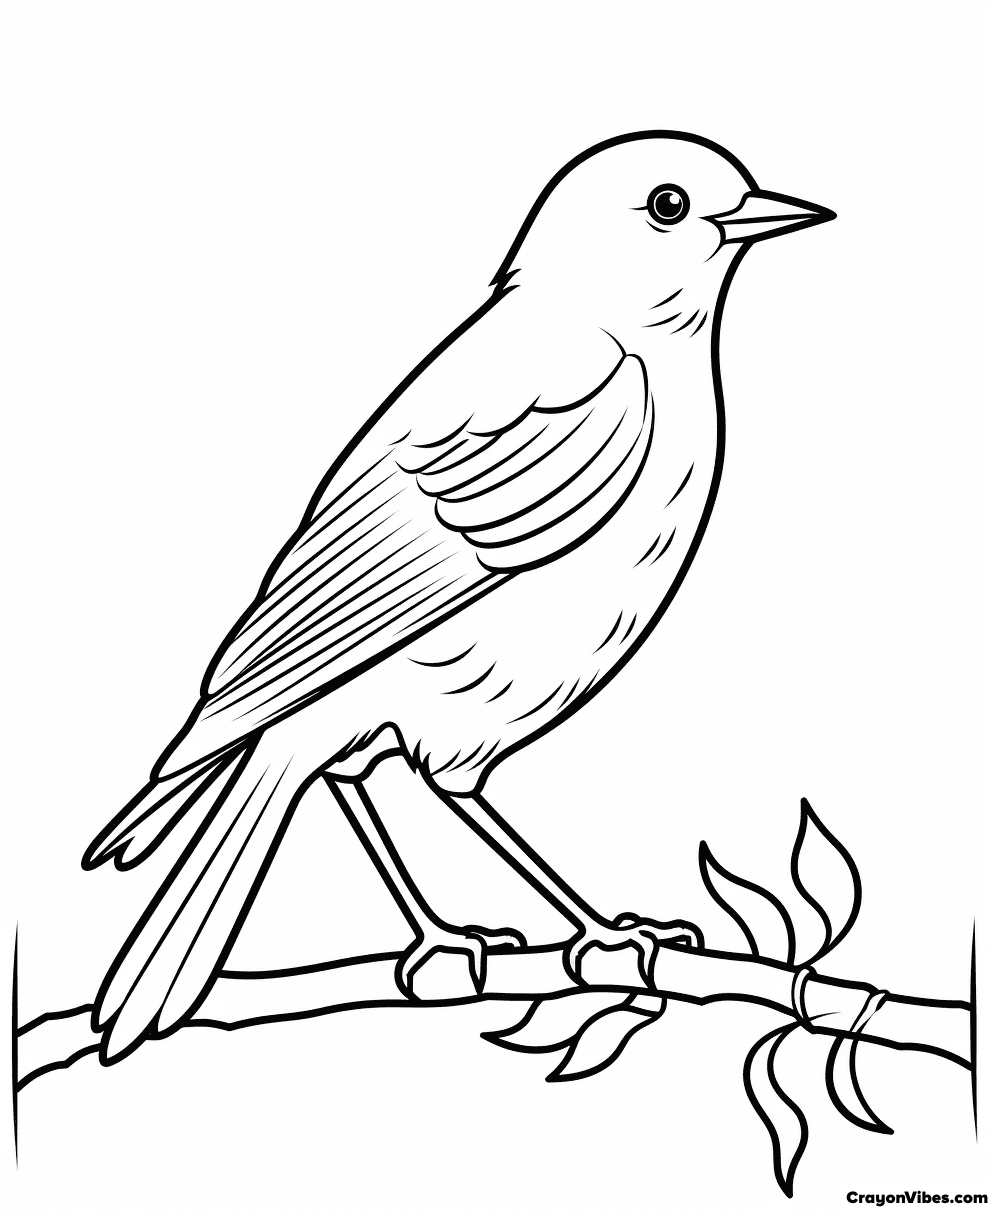 Cowbird Coloring Pages Free Printable Sheets for Kids & Adults